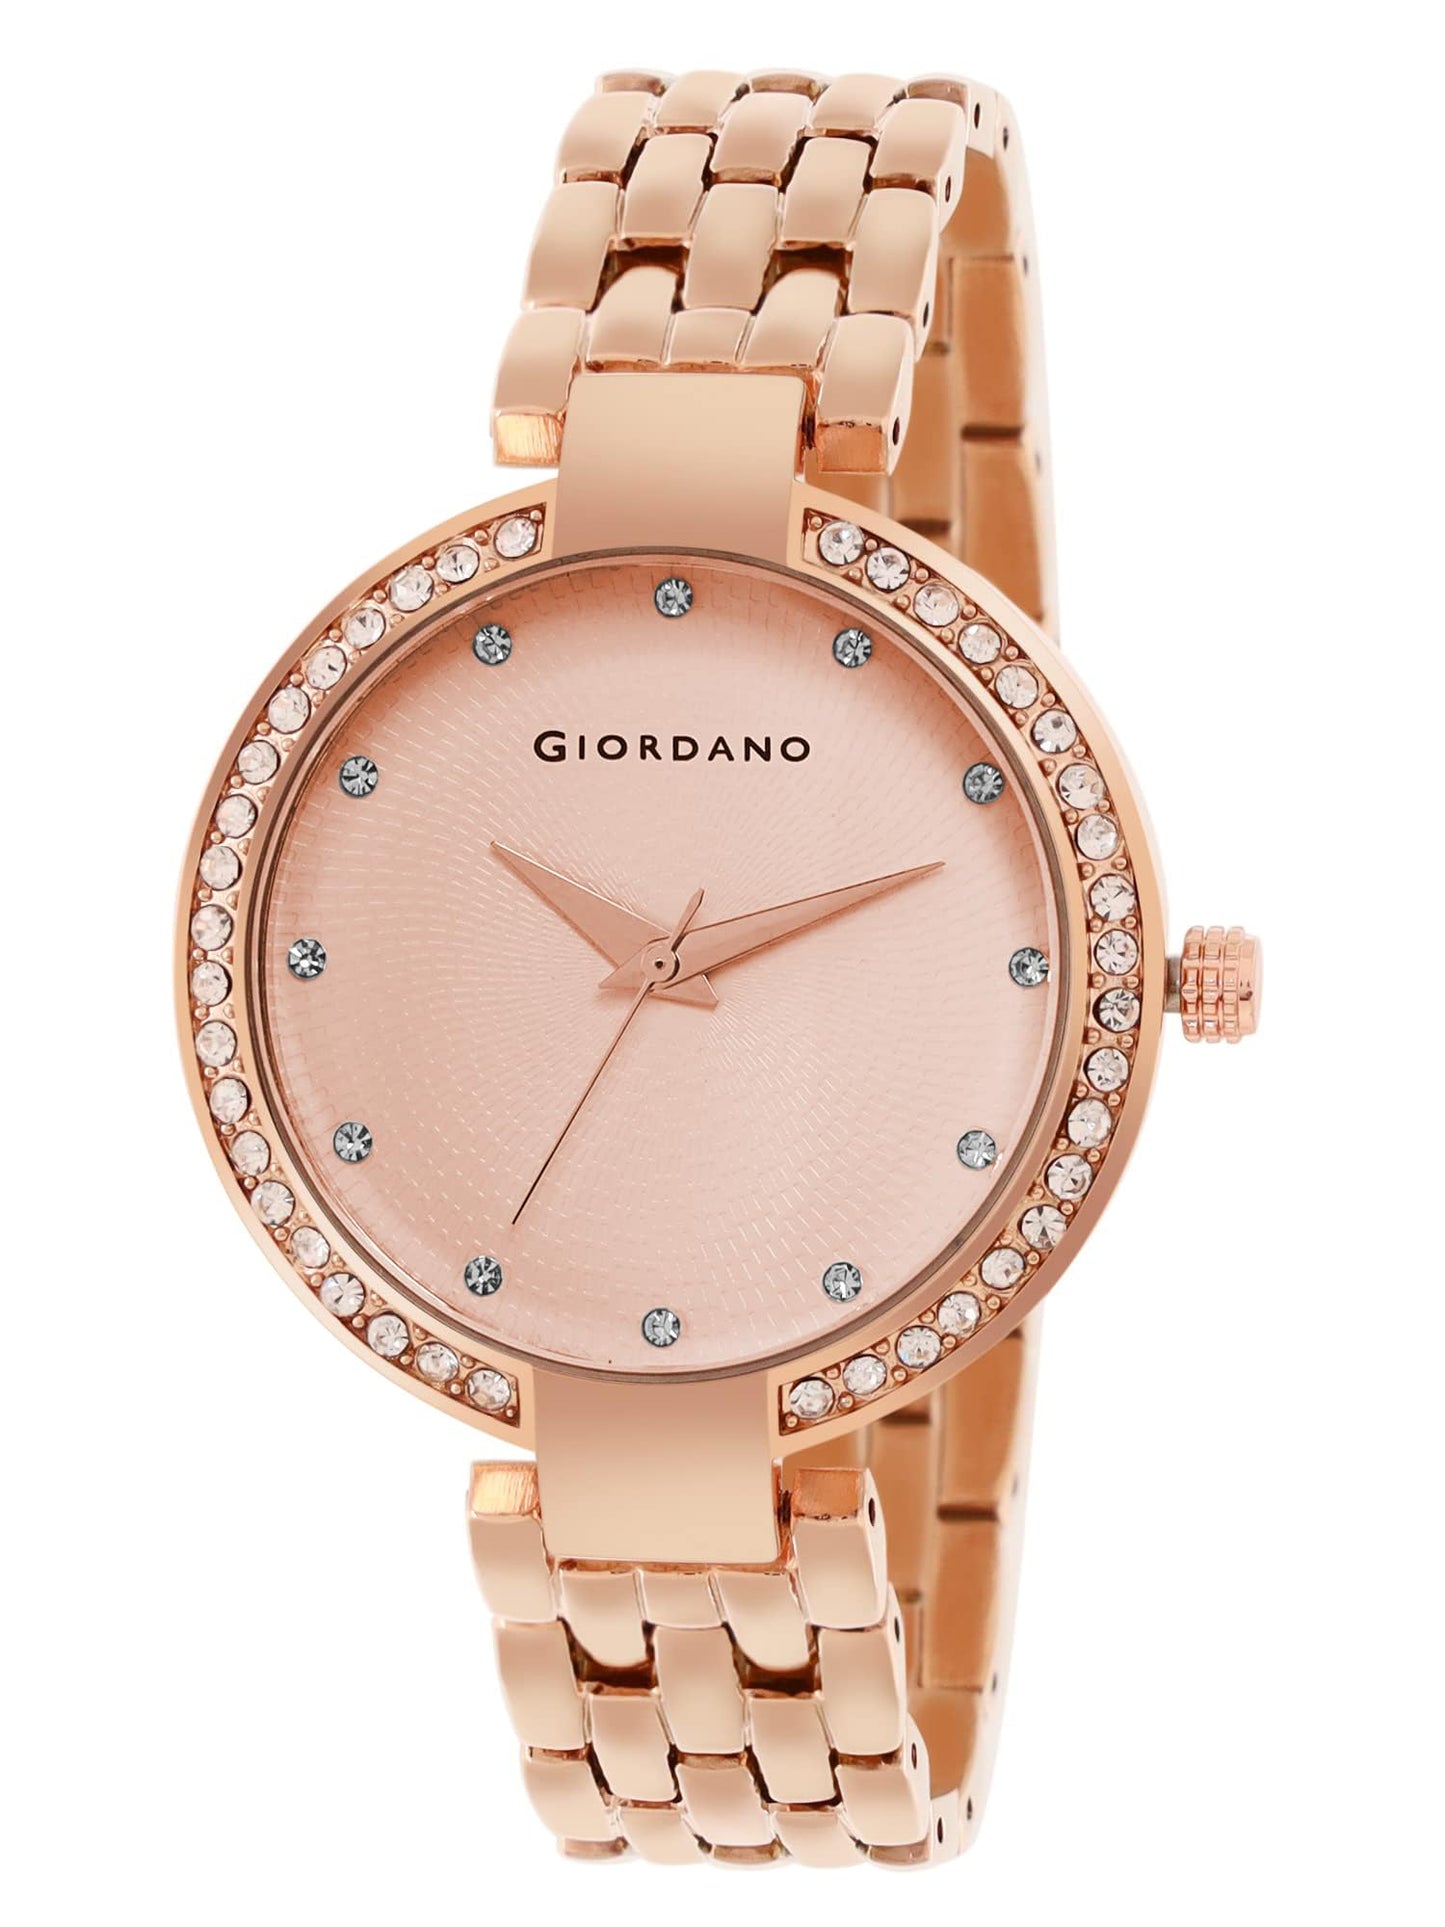 Giordano Fashionista Analogue Watch for Women Stylish Metal Strap, Diamond Studded Dial Ladies Wrist Watch 3 Hand, Ideal Gift for Female - GD-2141 (Full Rose Gold)